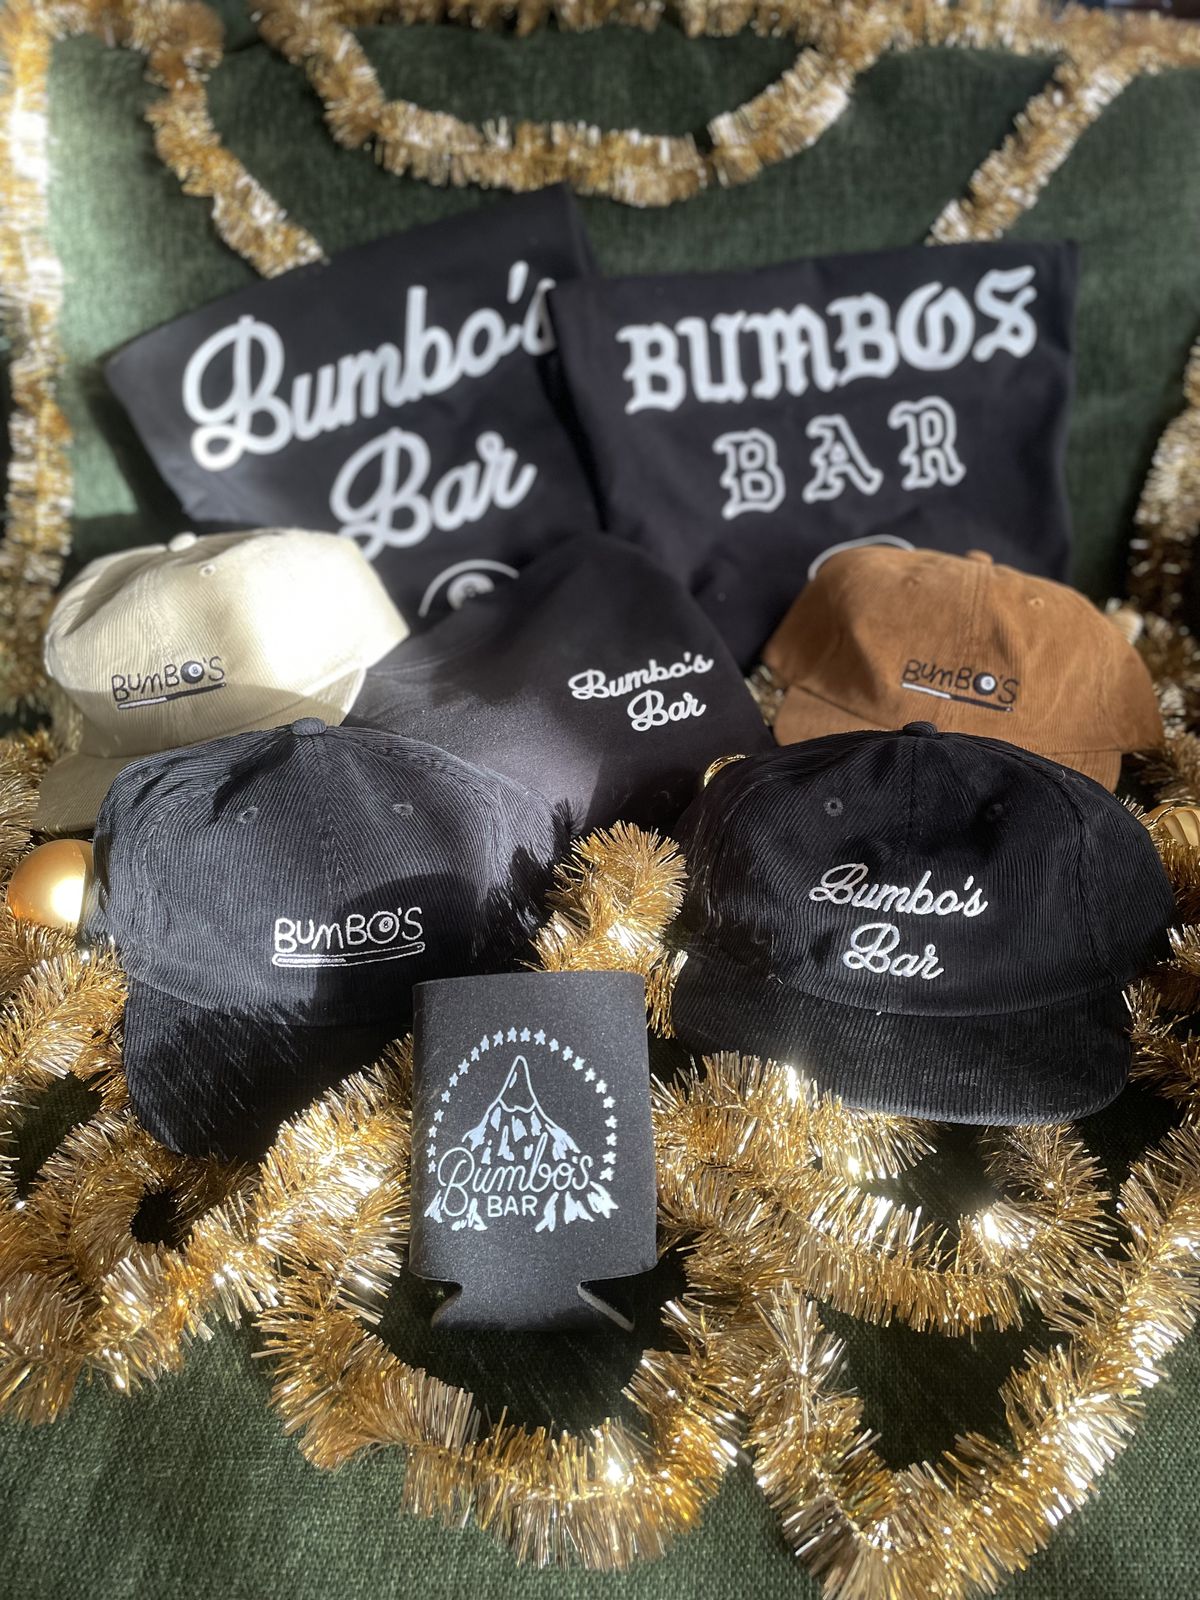 Baseball hats in black, brown, and tan, with Bumbo’s Bar embroidered, a beer cozy, with gold garland.